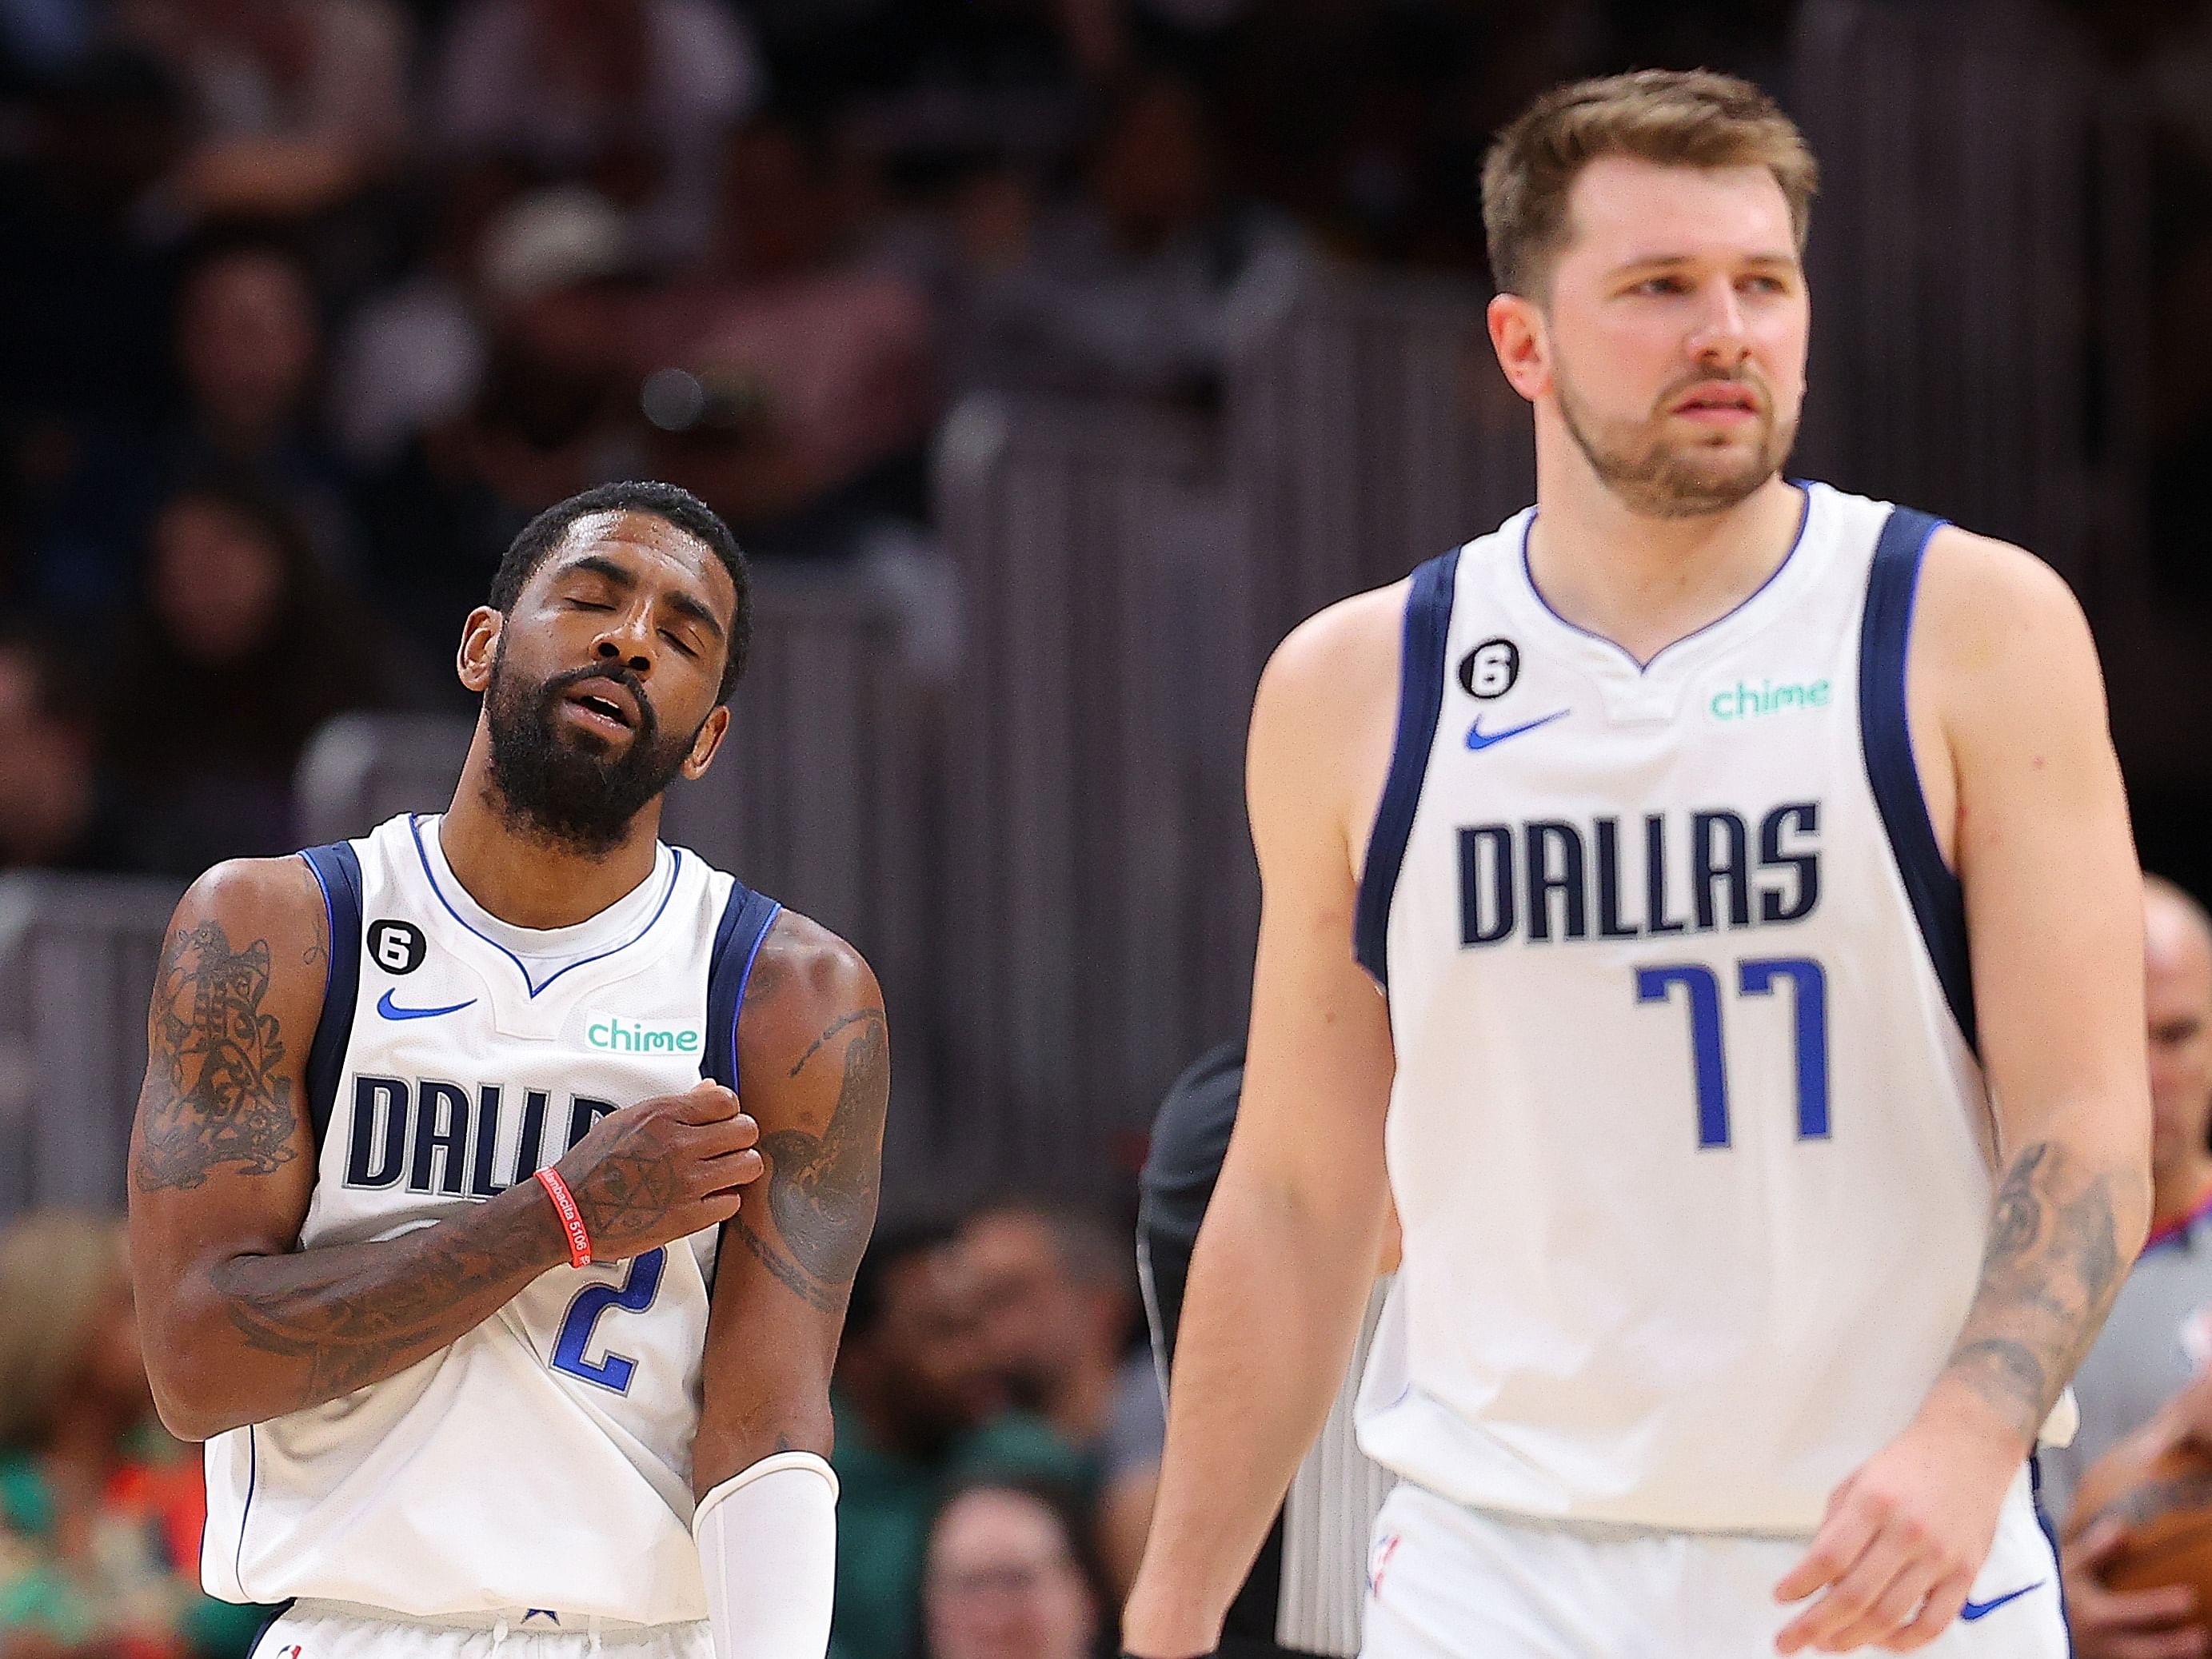 Kyrie Irving and Luka Doncic of the Dallas Mavericks